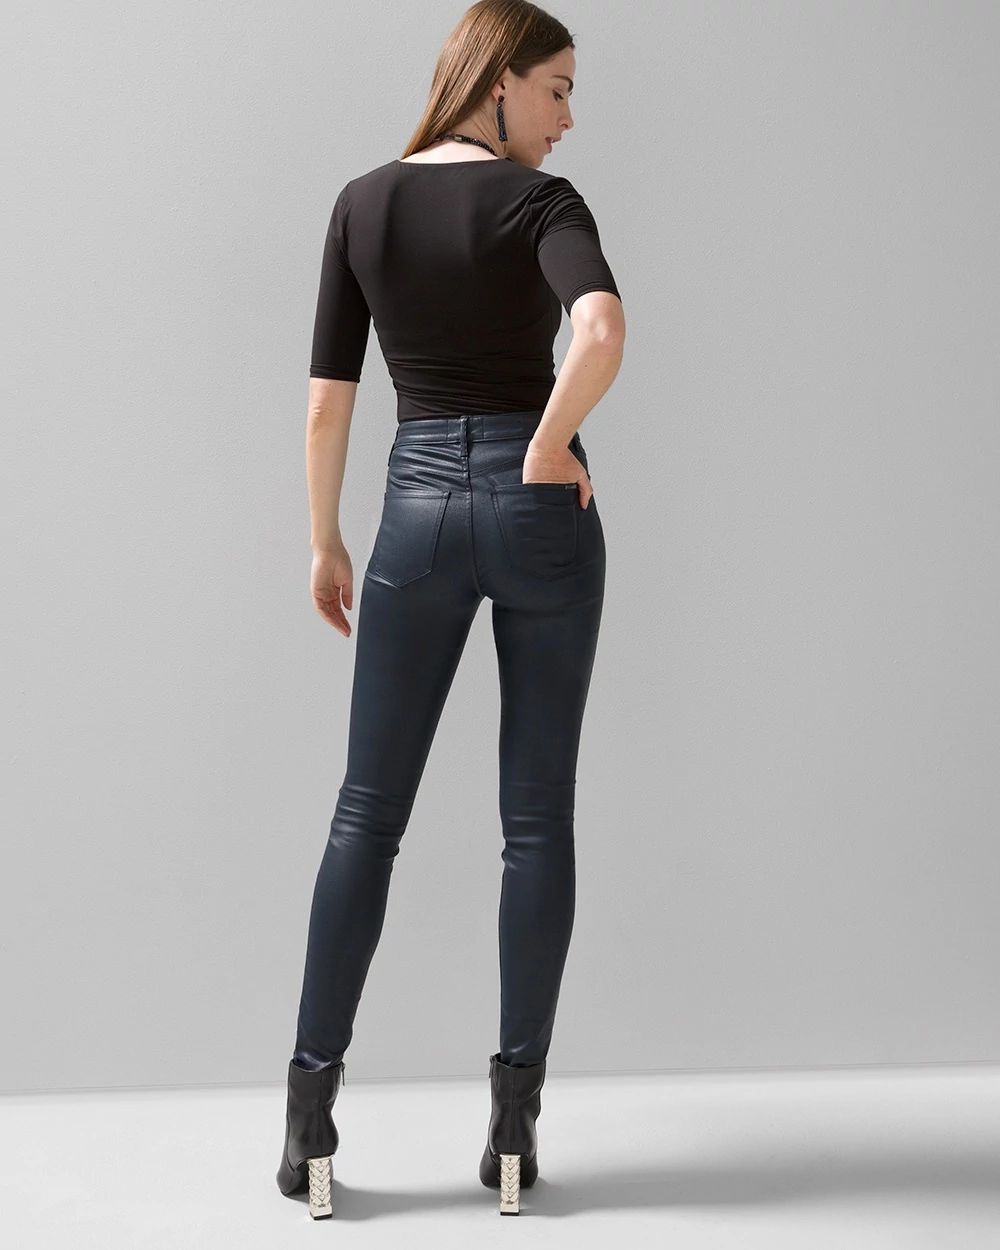 Petite High-Rise Coated Skinny Jeans click to view larger image.